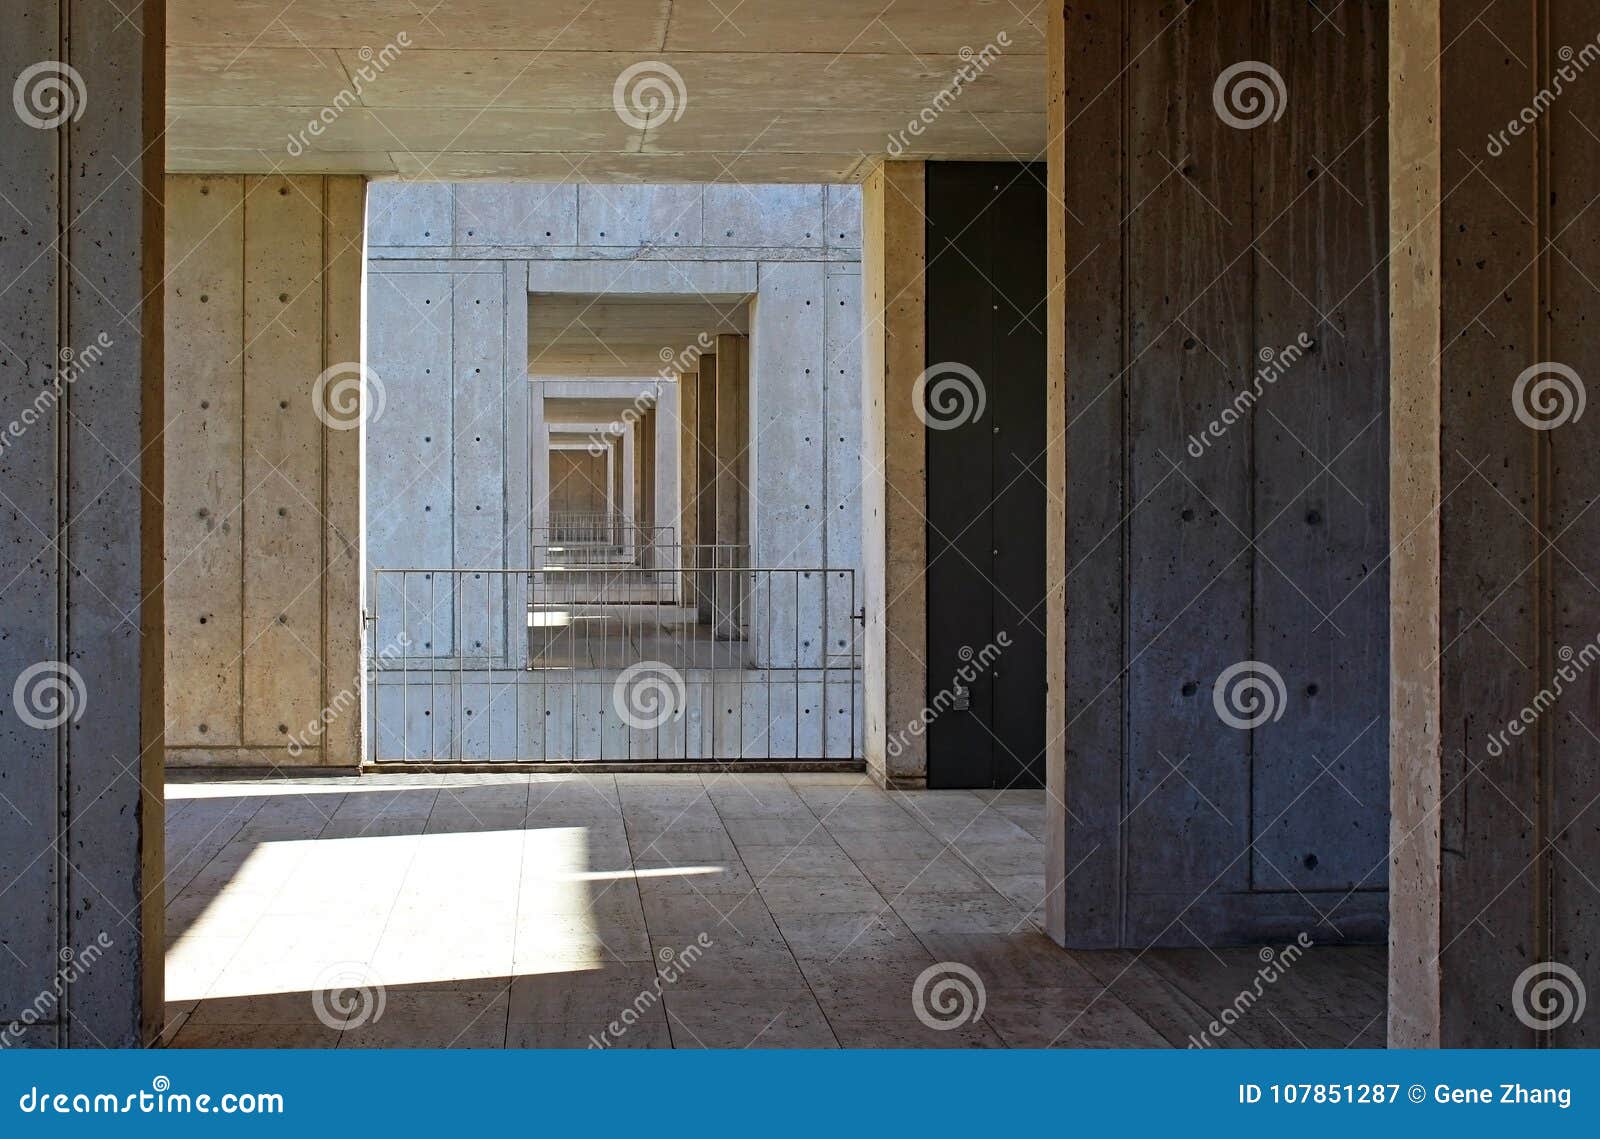 Consise Cement Structure of the Salk Institute by Louis Kahn Stock Image -  Image of exterior, founded: 107851287